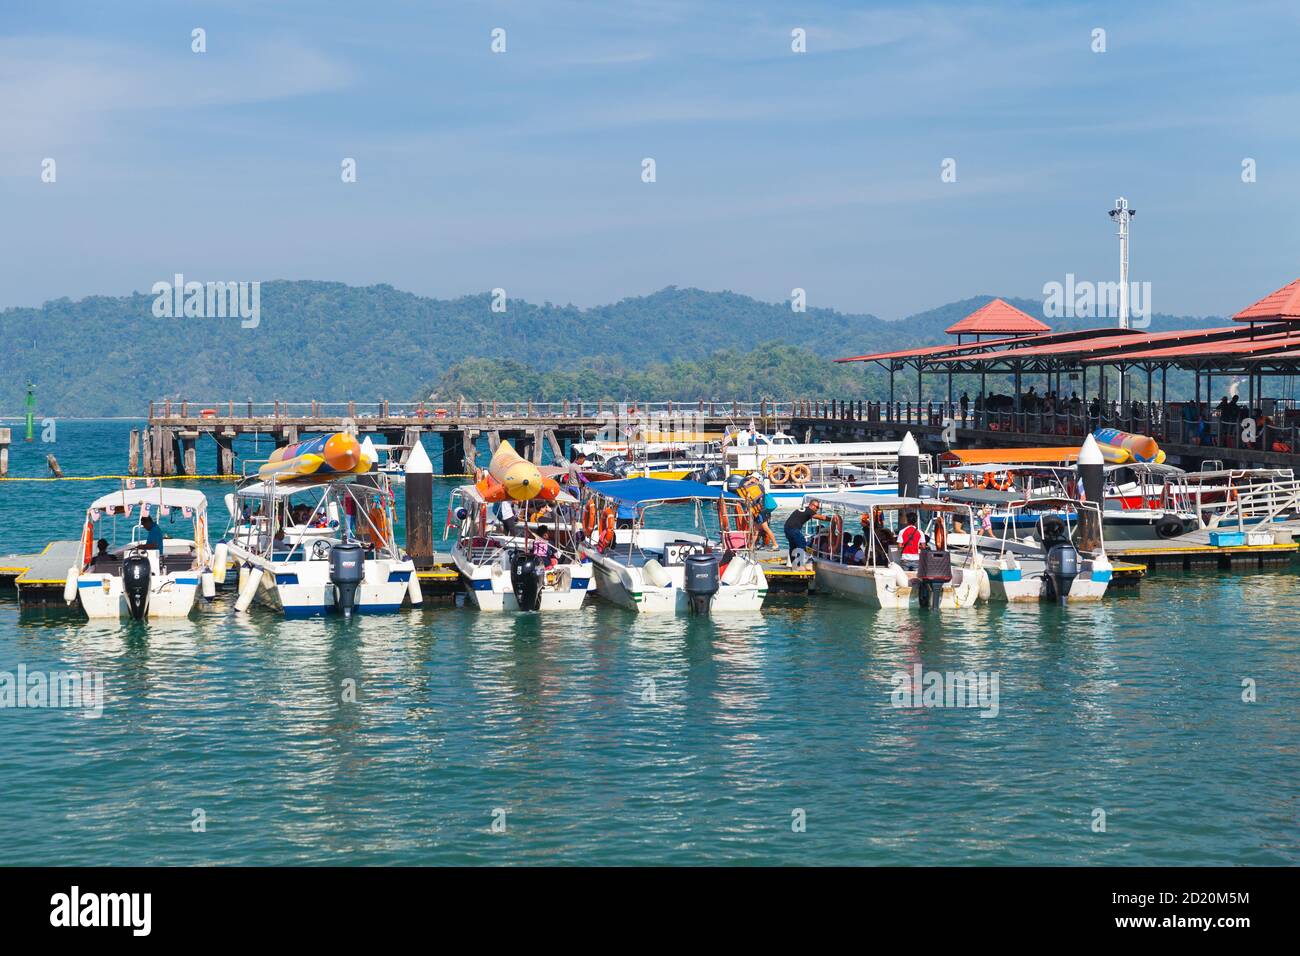 Kota Kinabalu, Malaysia - March 17, 2019: Small motorboats with passengers are moored near Jesselton Point ferry terminal at sunny day Stock Photo